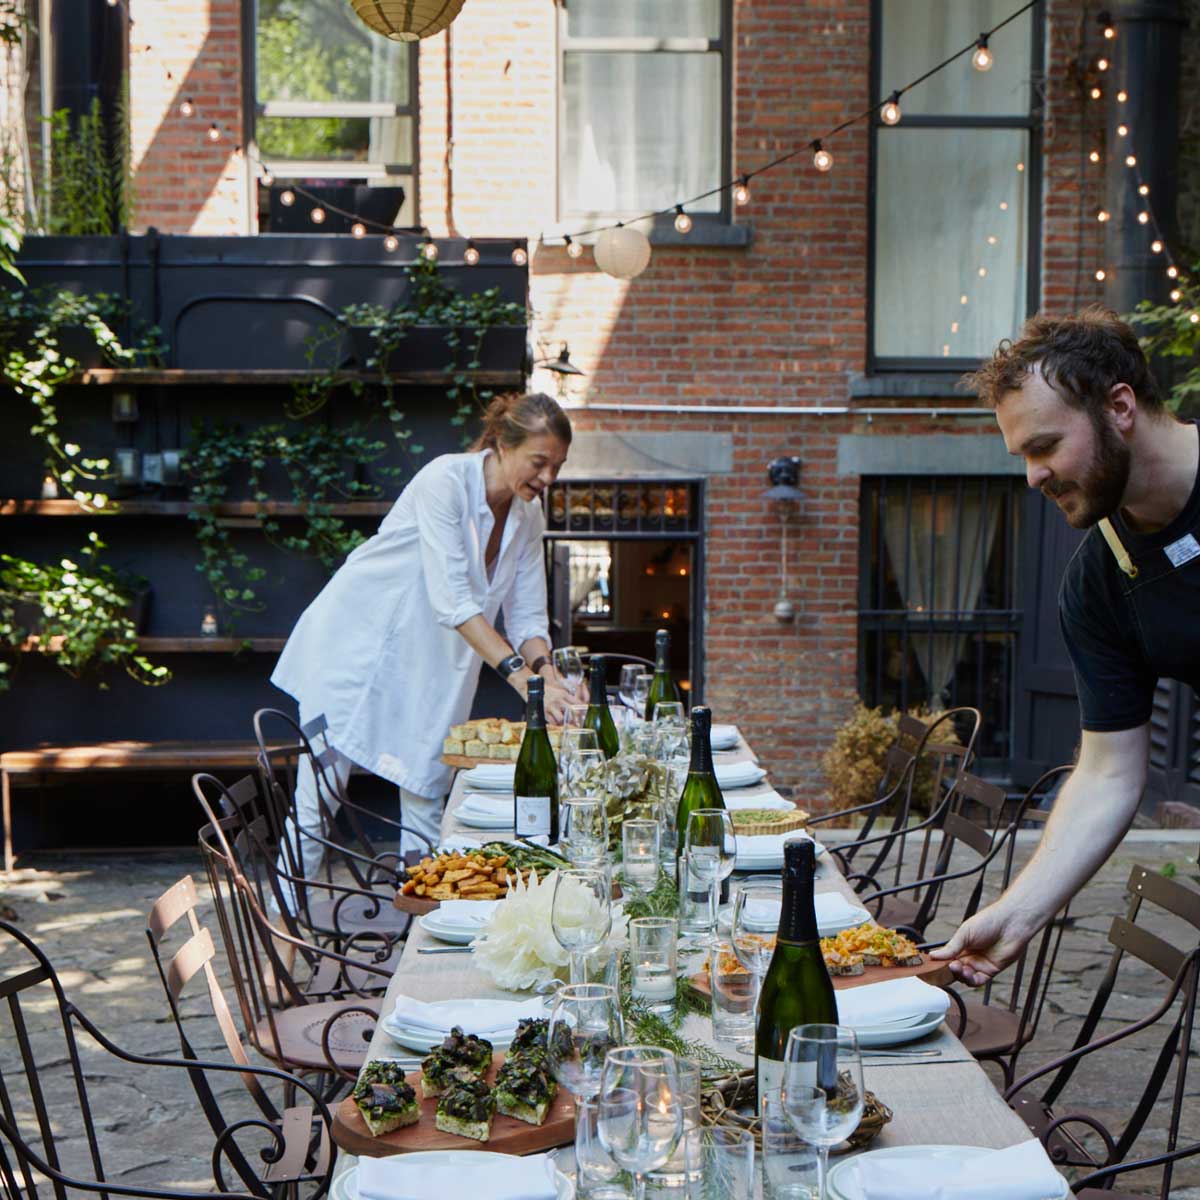 Setting up a romantic Wedding dinner in a intimate Brooklyn Garden Venue.